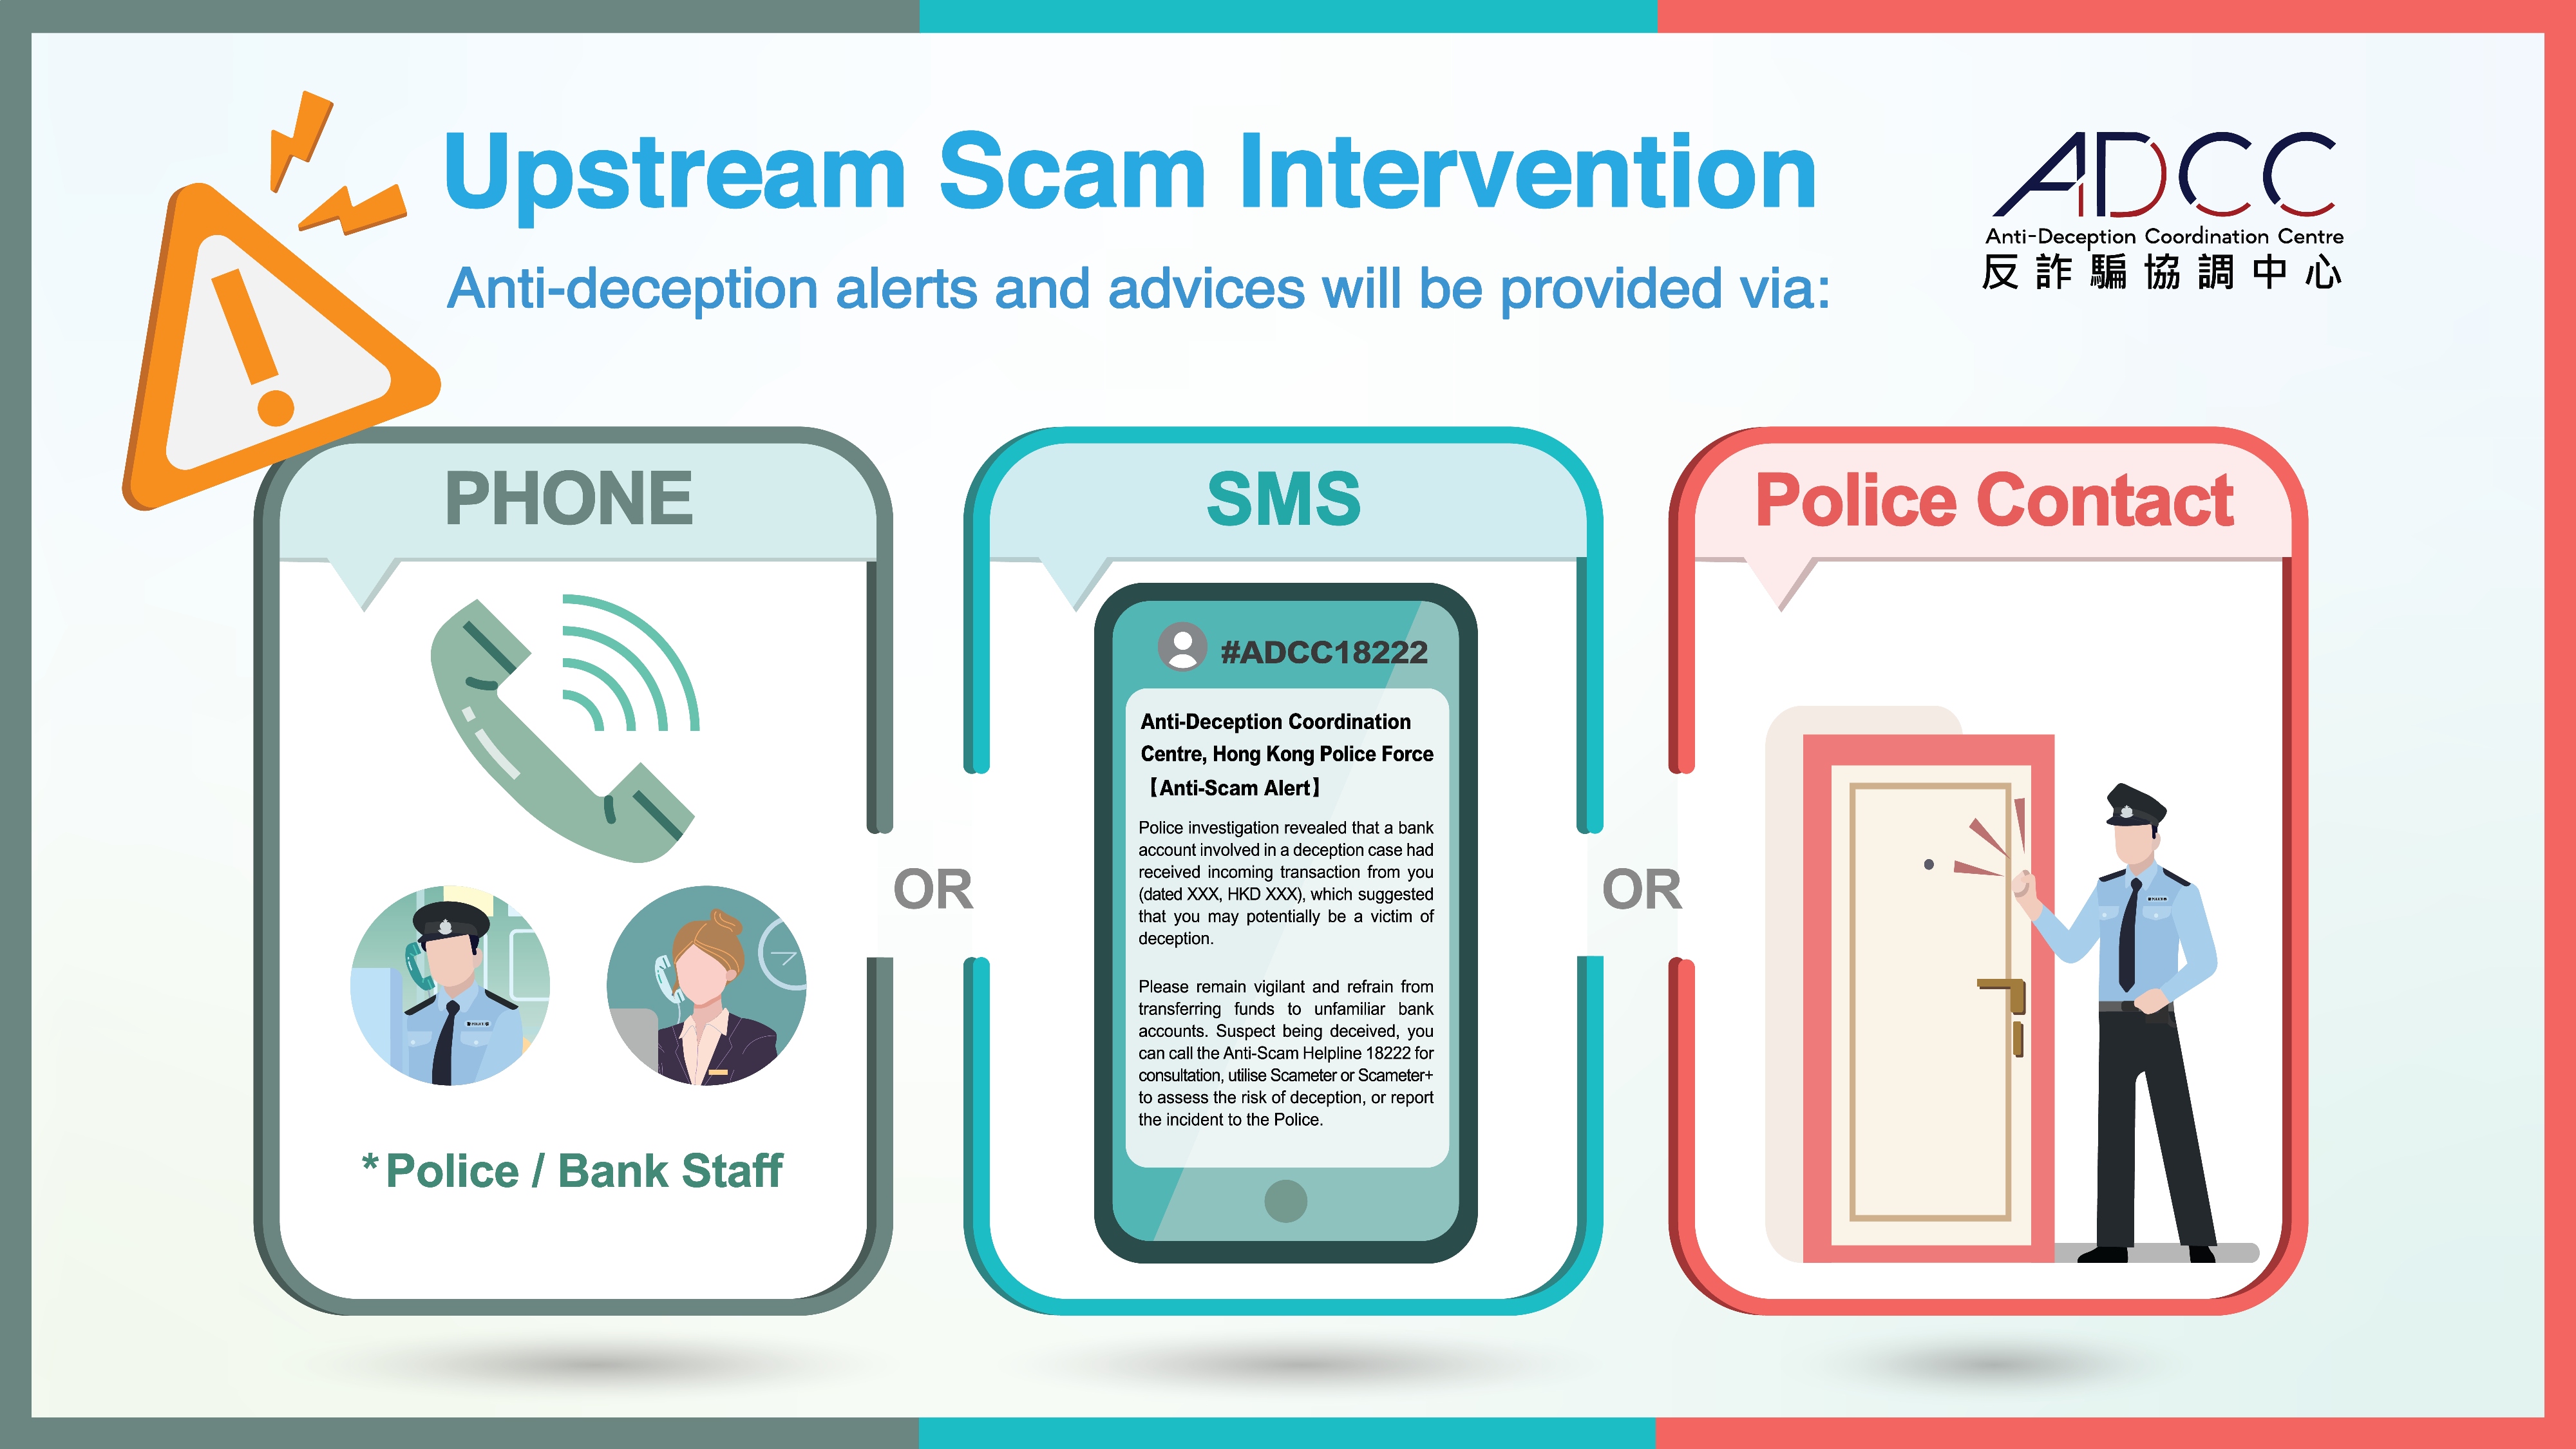 In addition to contacting potential victims via phone calls or police visits, the Anti-Deception Coordination Centre (ADCC) of the Hong Kong Police Force will expand its prevention efforts to include sending SMS alerts to provide timely warnings starting tomorrow (January 2).